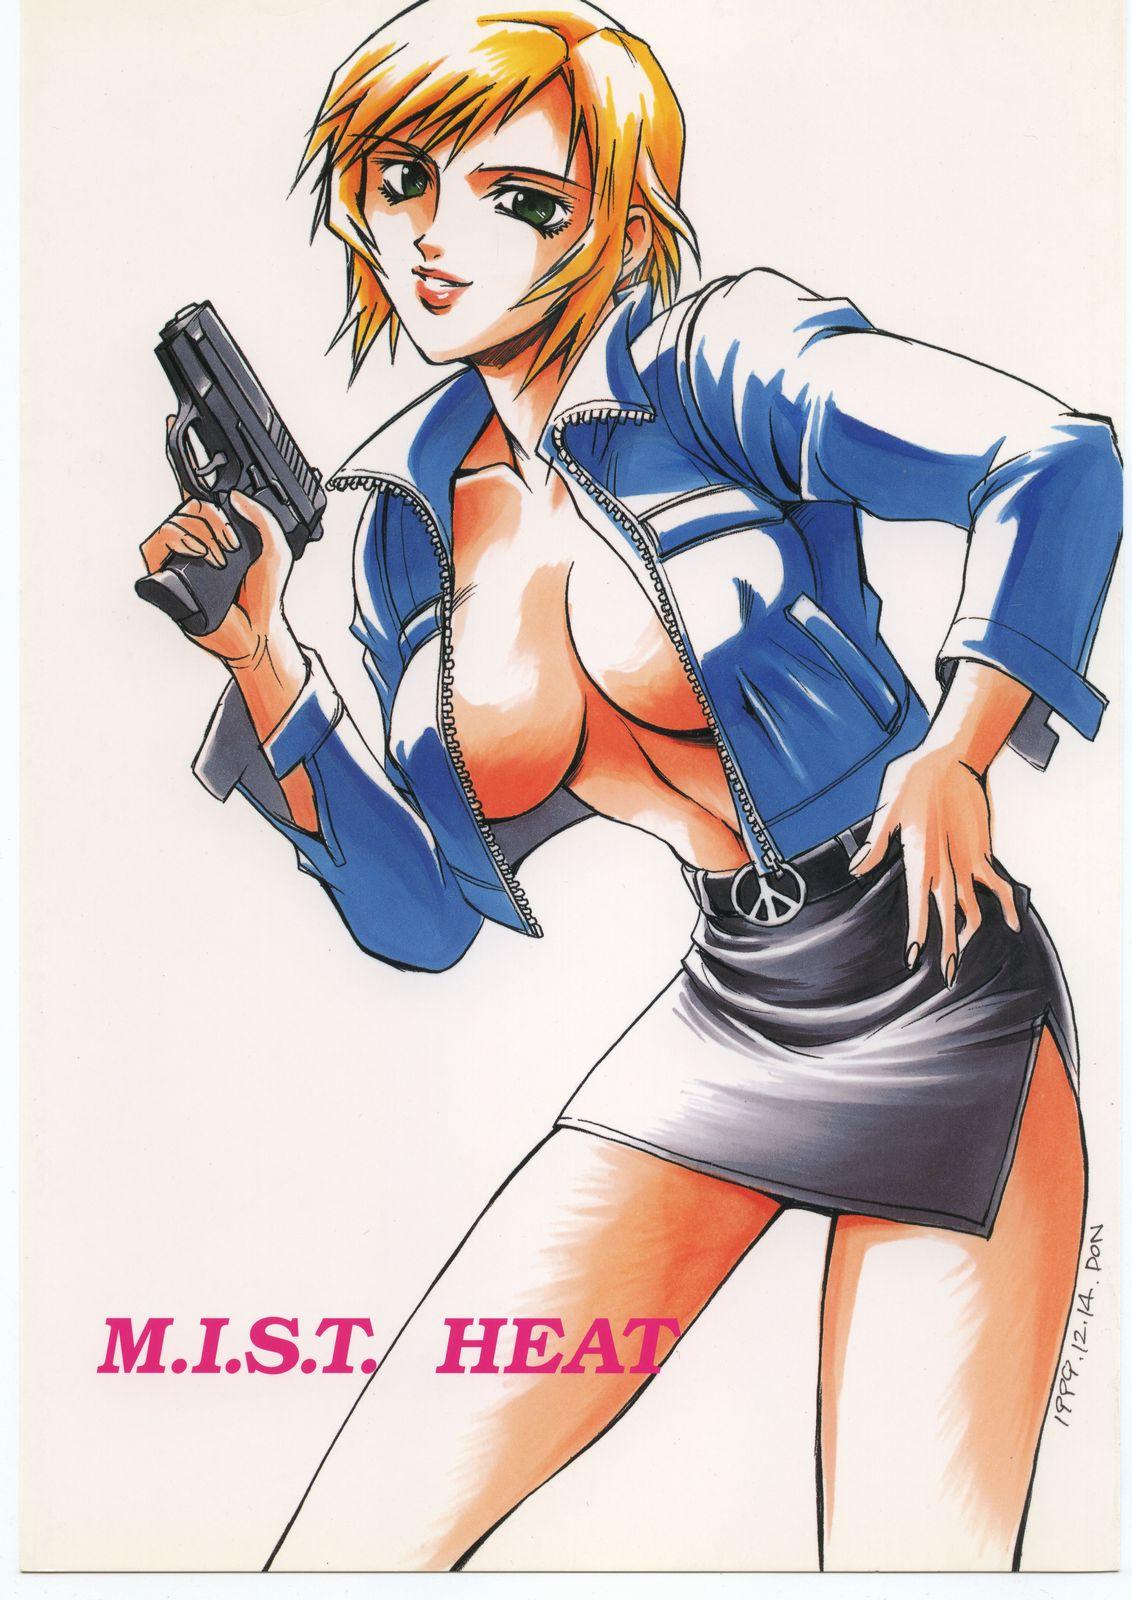 Mmf M.I.S.T. HEAT - Parasite eve Holes - Picture 1